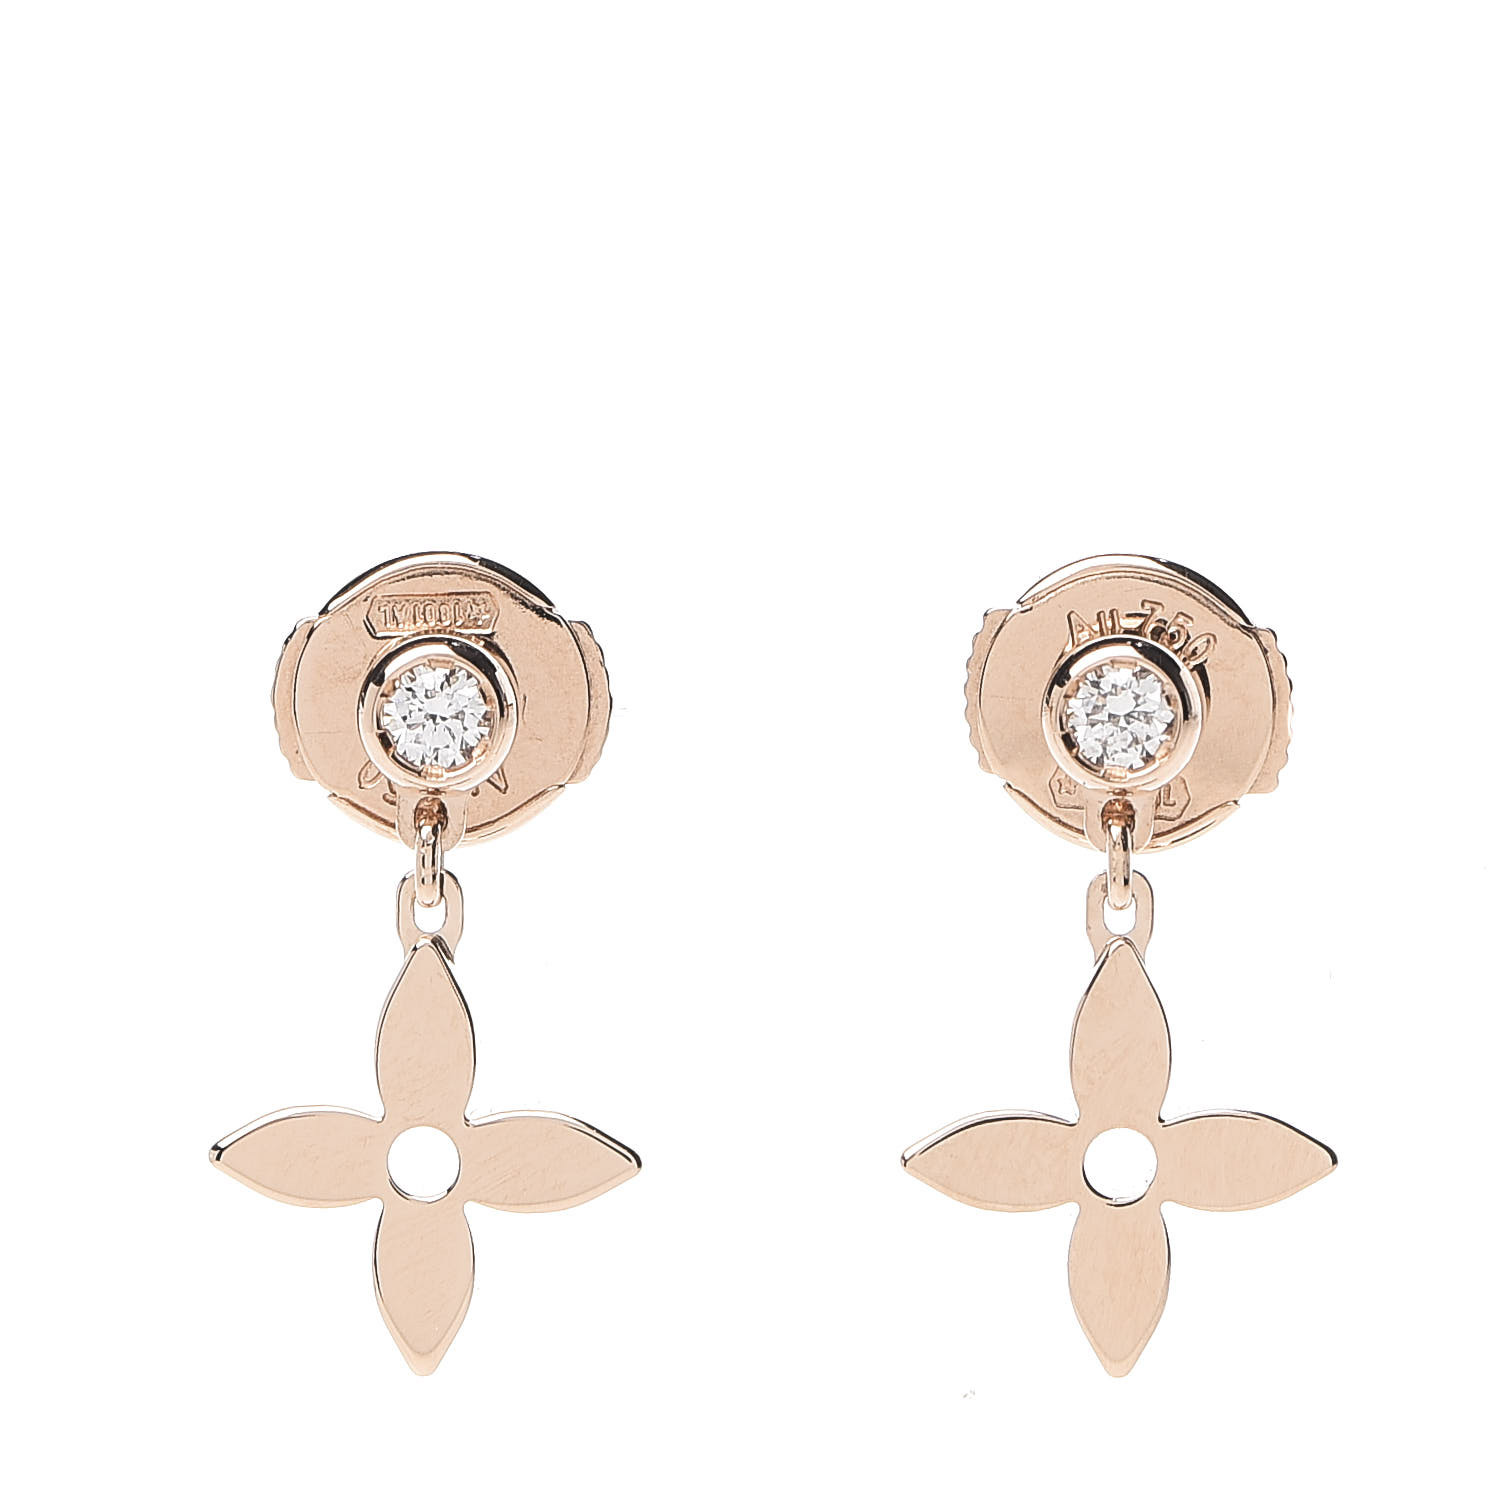 Louis Vuitton Mixed Gold and Diamond B Blossom Earrings